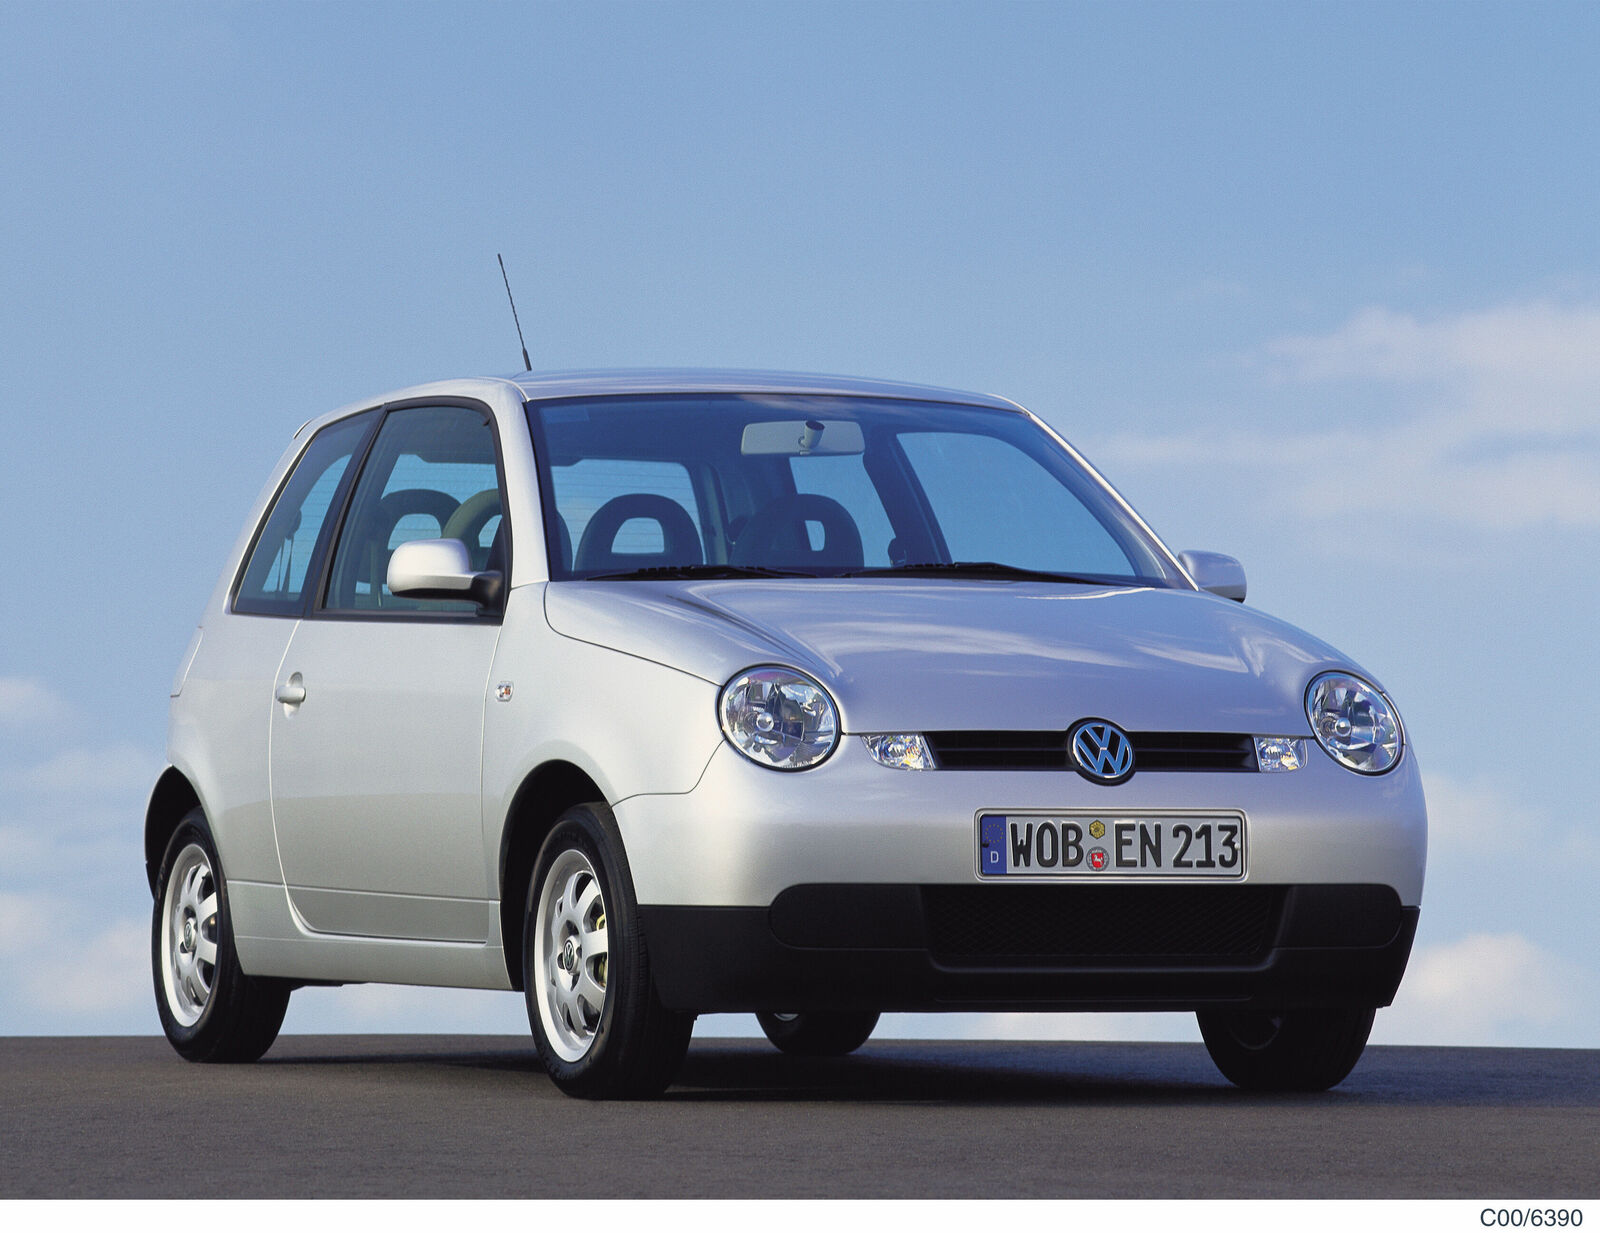 VW Lupo With 2.0 Turbo Looks Nervous At 158 MPH On The Autobahn